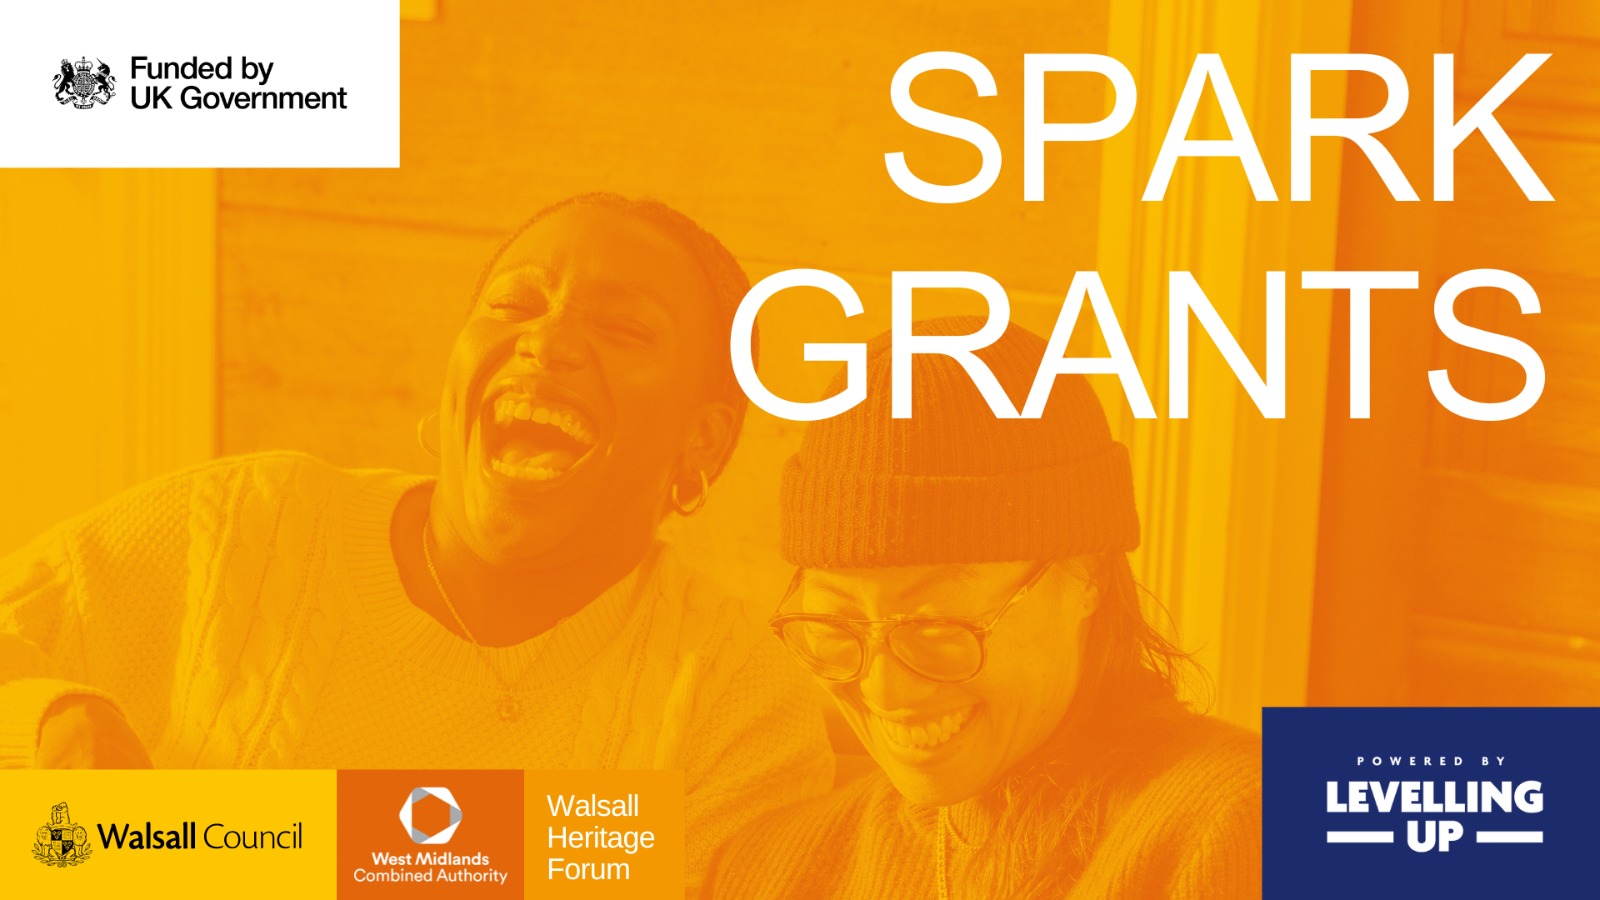 Spark grants logos: Funded by UK Government; Walsall Council; West Midlands Combined Authority; Walsall Heritage Forum; Powered by Levelling Up